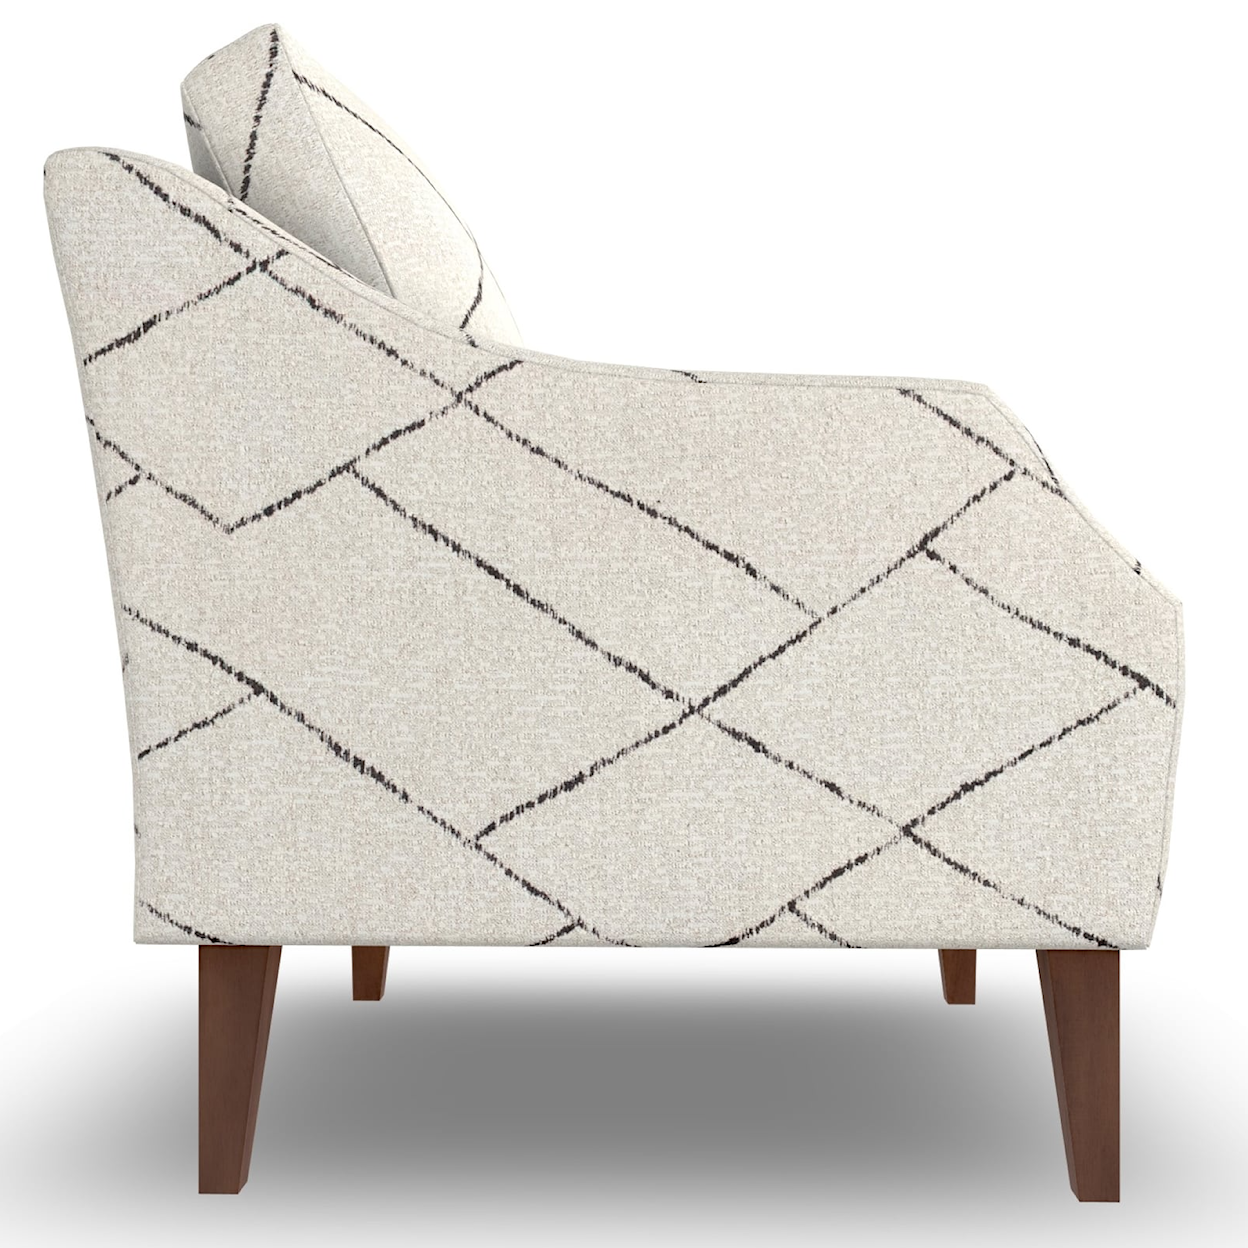 Best Home Furnishings Sienna Accent Chair